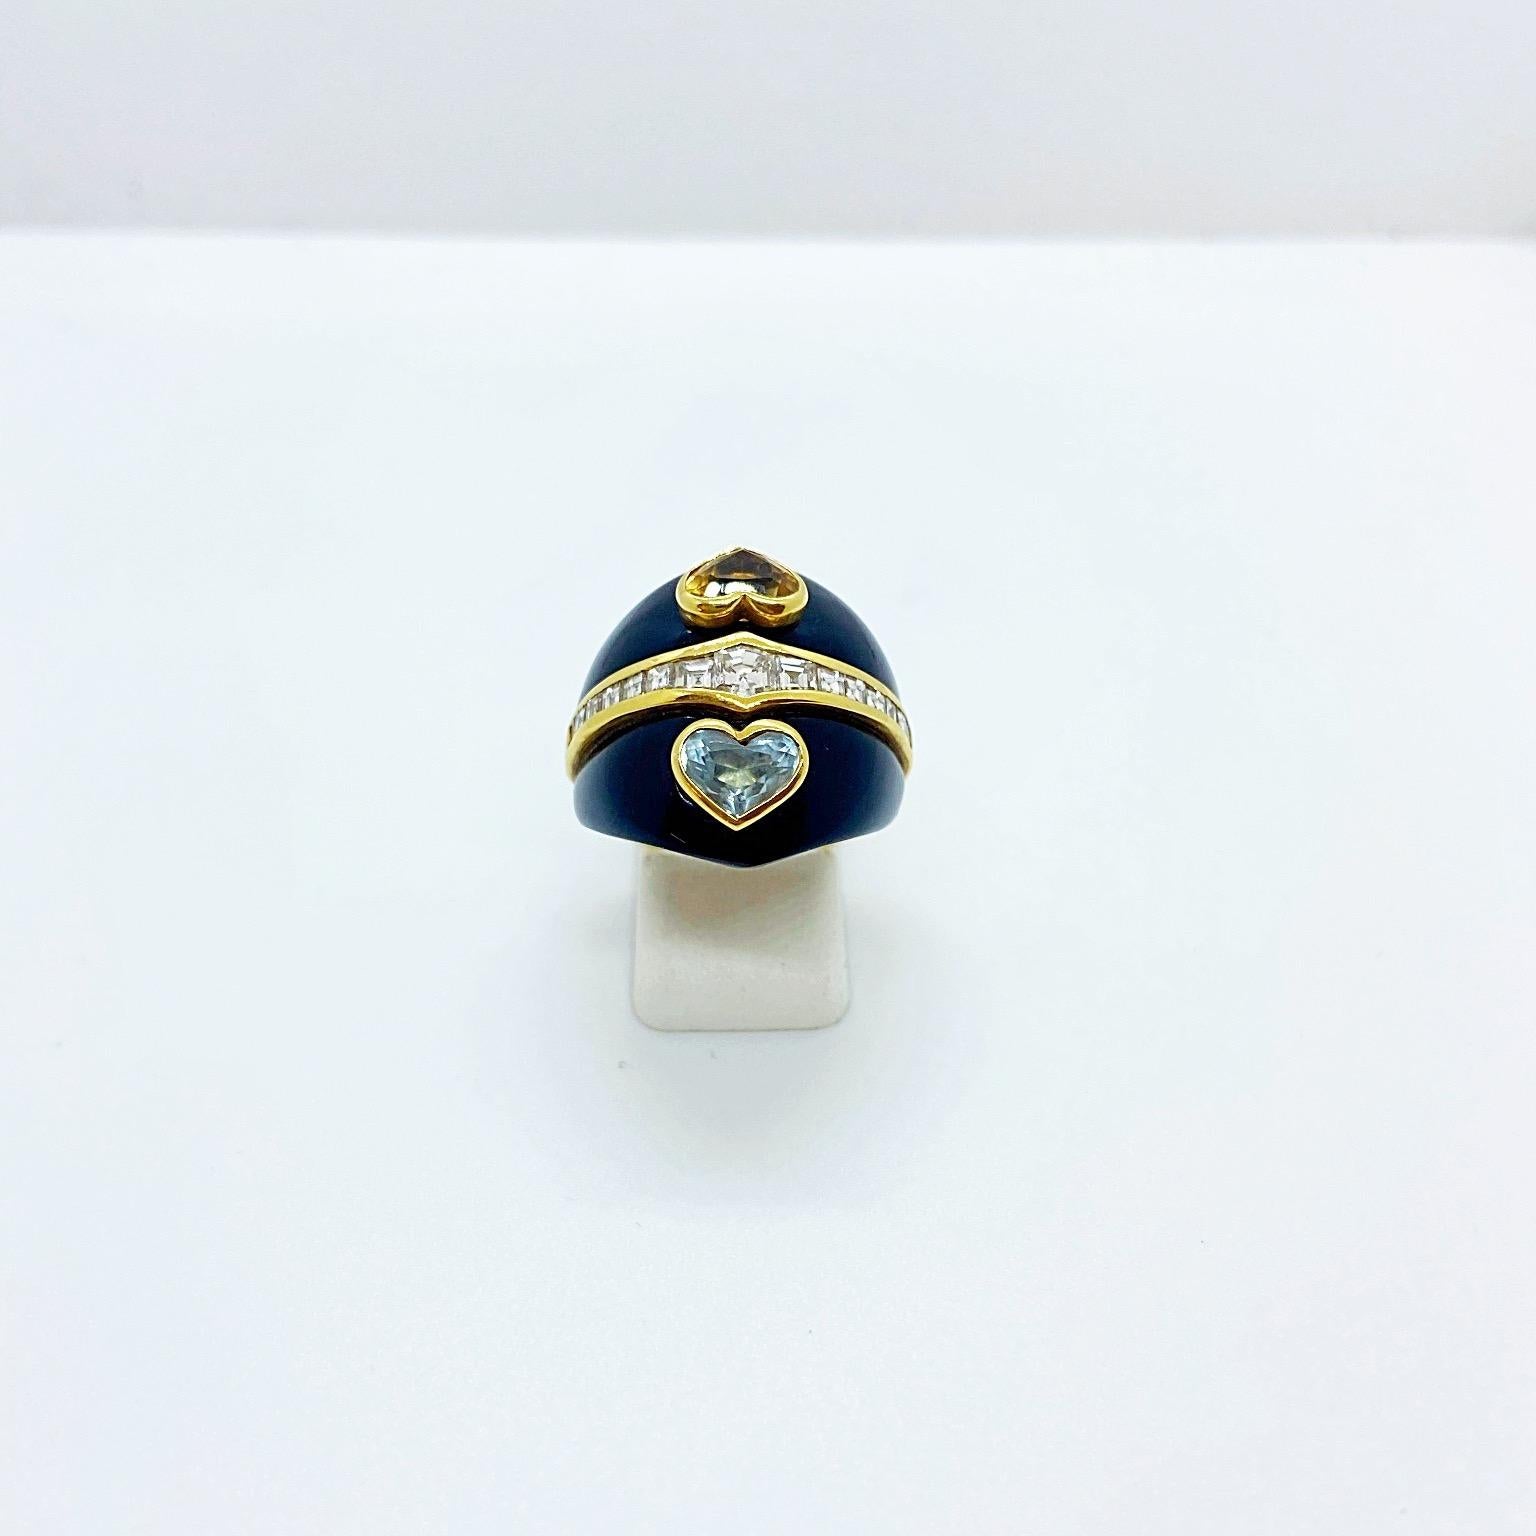 A beautifully crafted 18 karat yellow gold dome shaped ring. Two sections of black onyx are equally divided with a row of square cut diamonds. Two bezel set hearts ,one in citrine, the other in aquamarine are mounted atop the onyx. The color